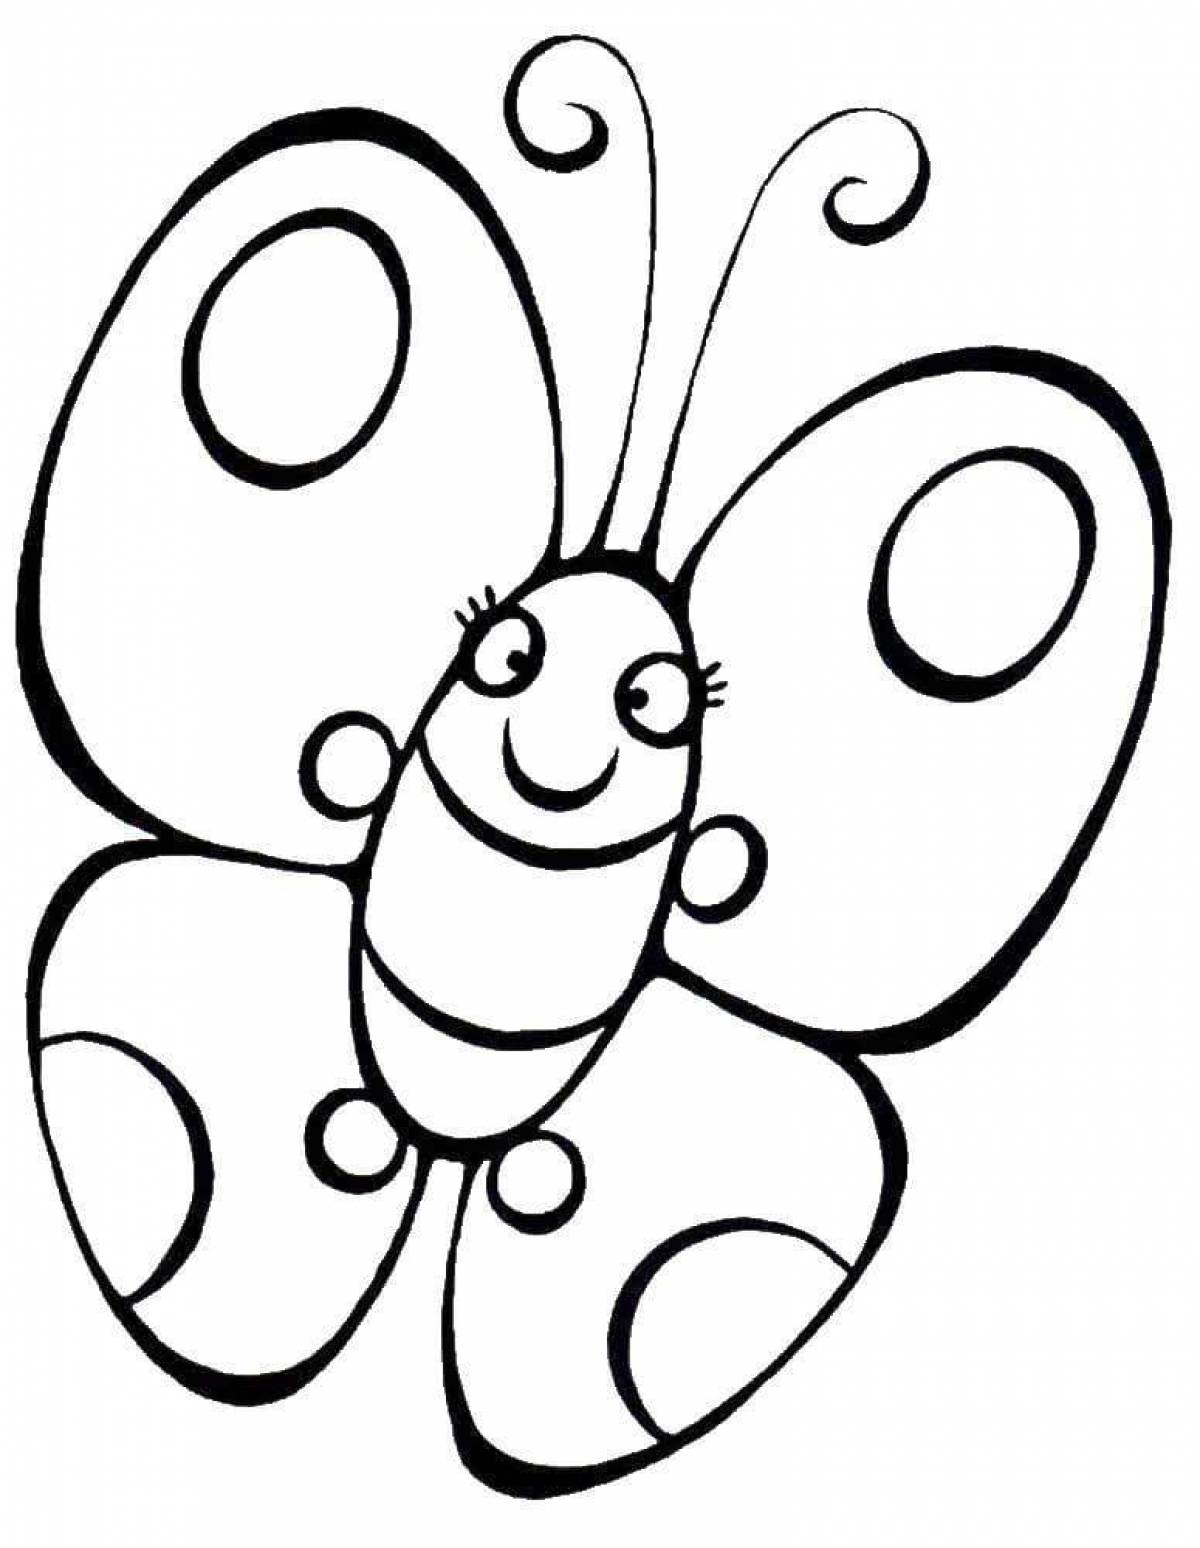 A cheerful butterfly coloring book for children 3-4 years old